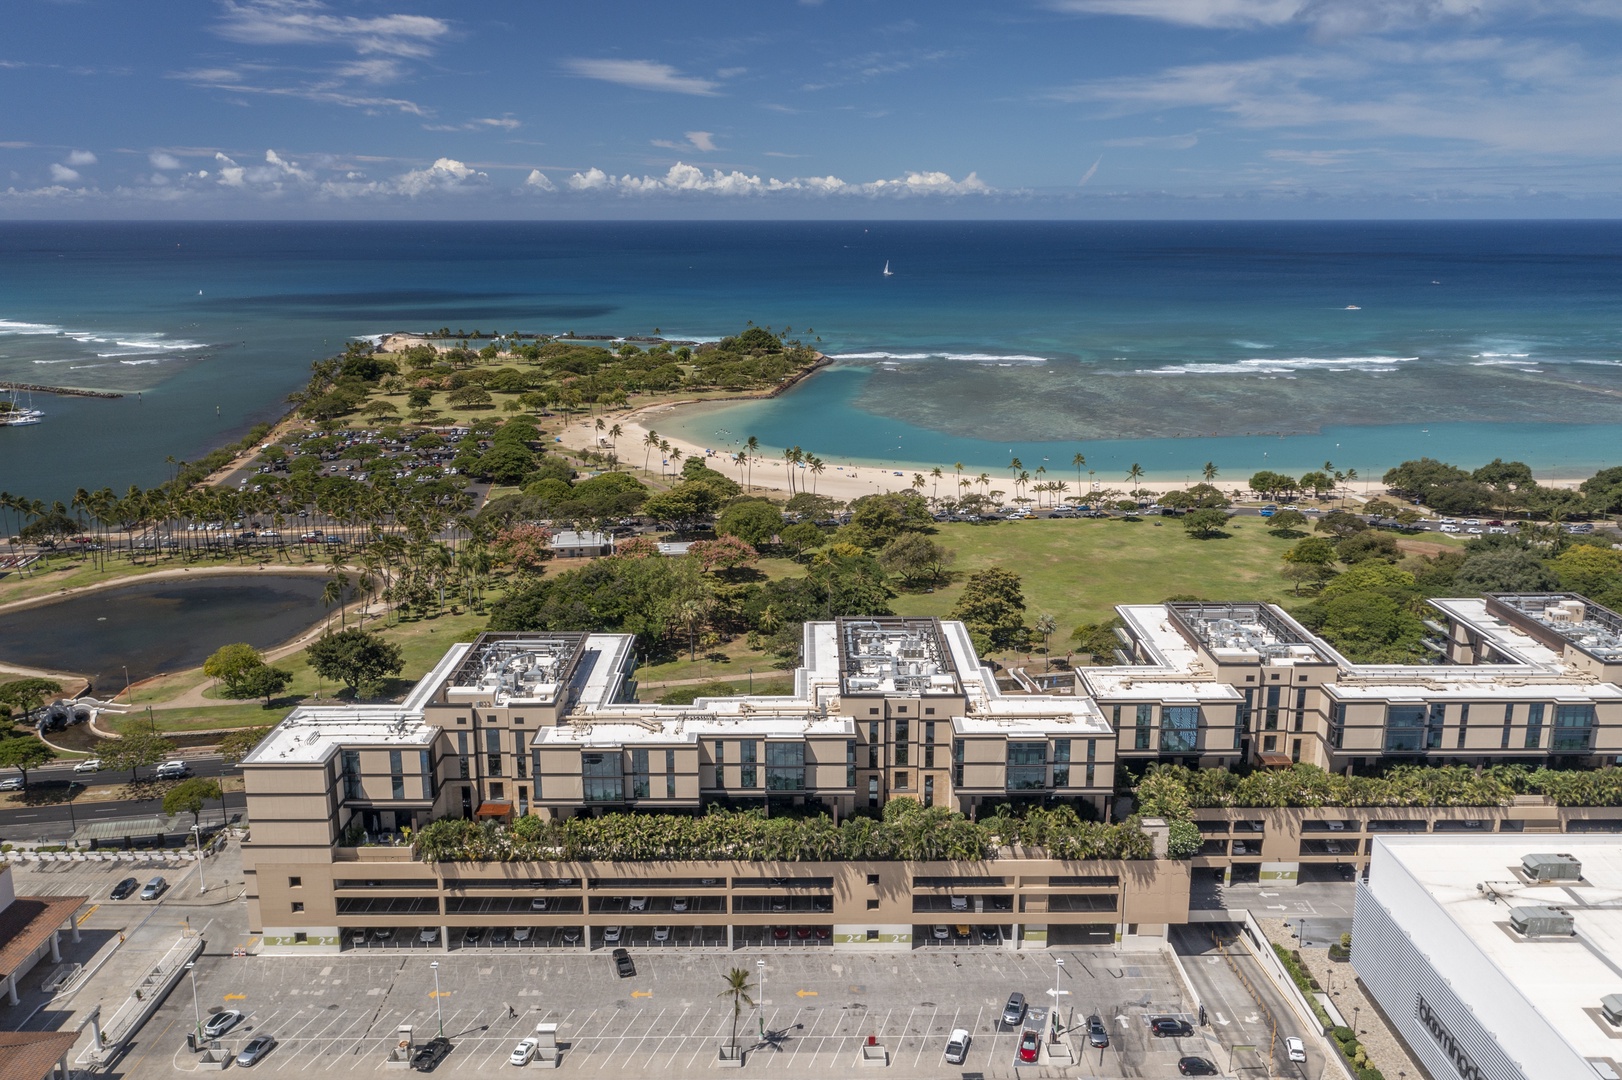 Honolulu Vacation Rentals, Park Lane Sky Resort - Right in the heart of Honolulu, you're bound to experience the trip of a lifetime here